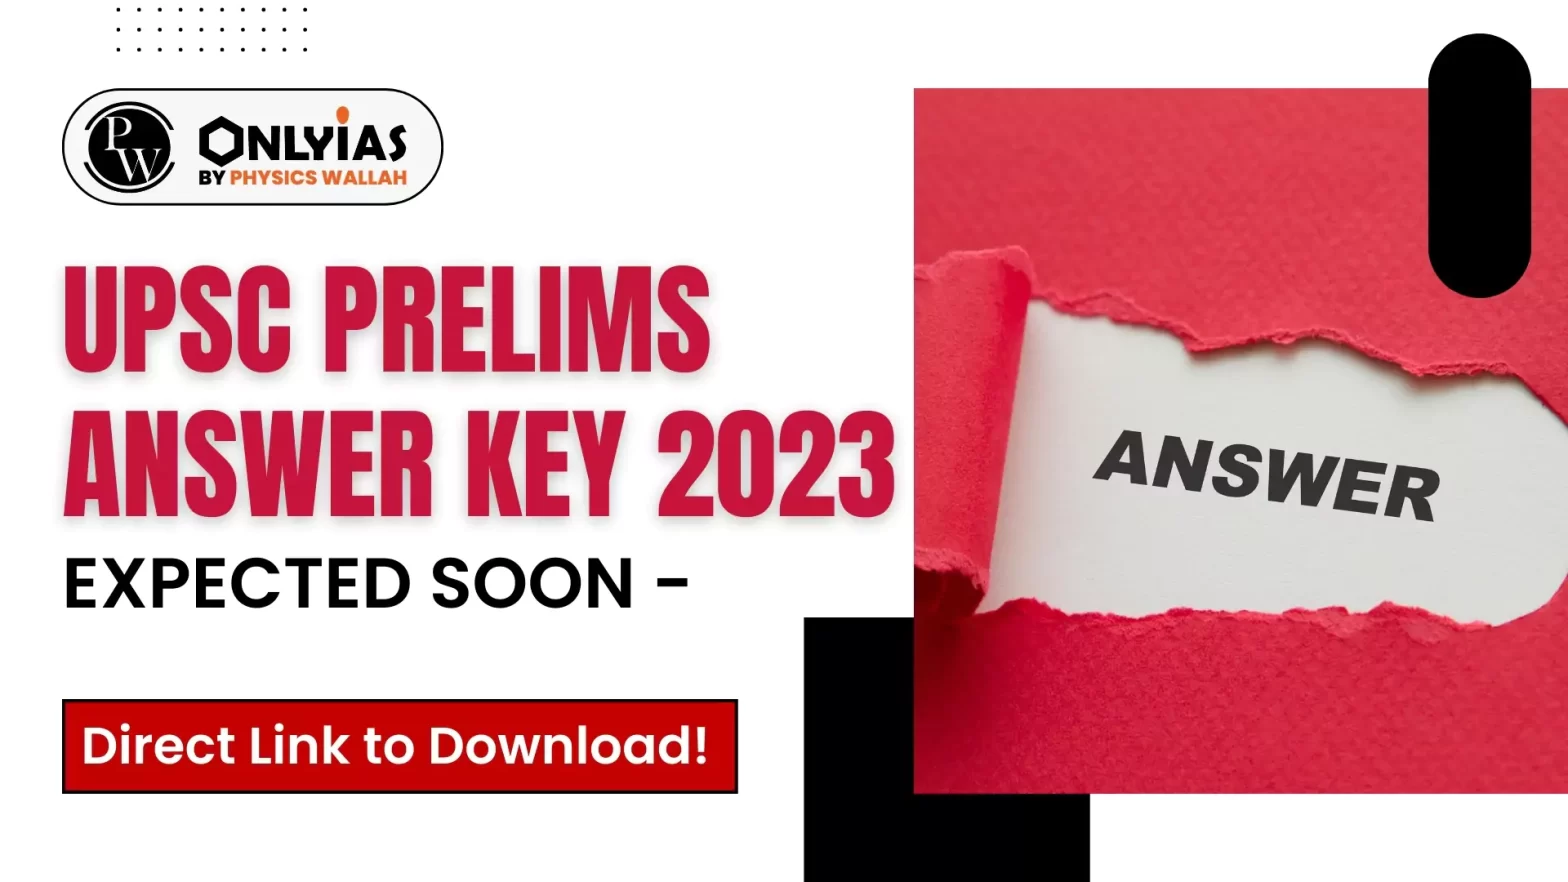 UPSC Prelims Answer Key 2023 Expected Soon – Direct Link to Download!